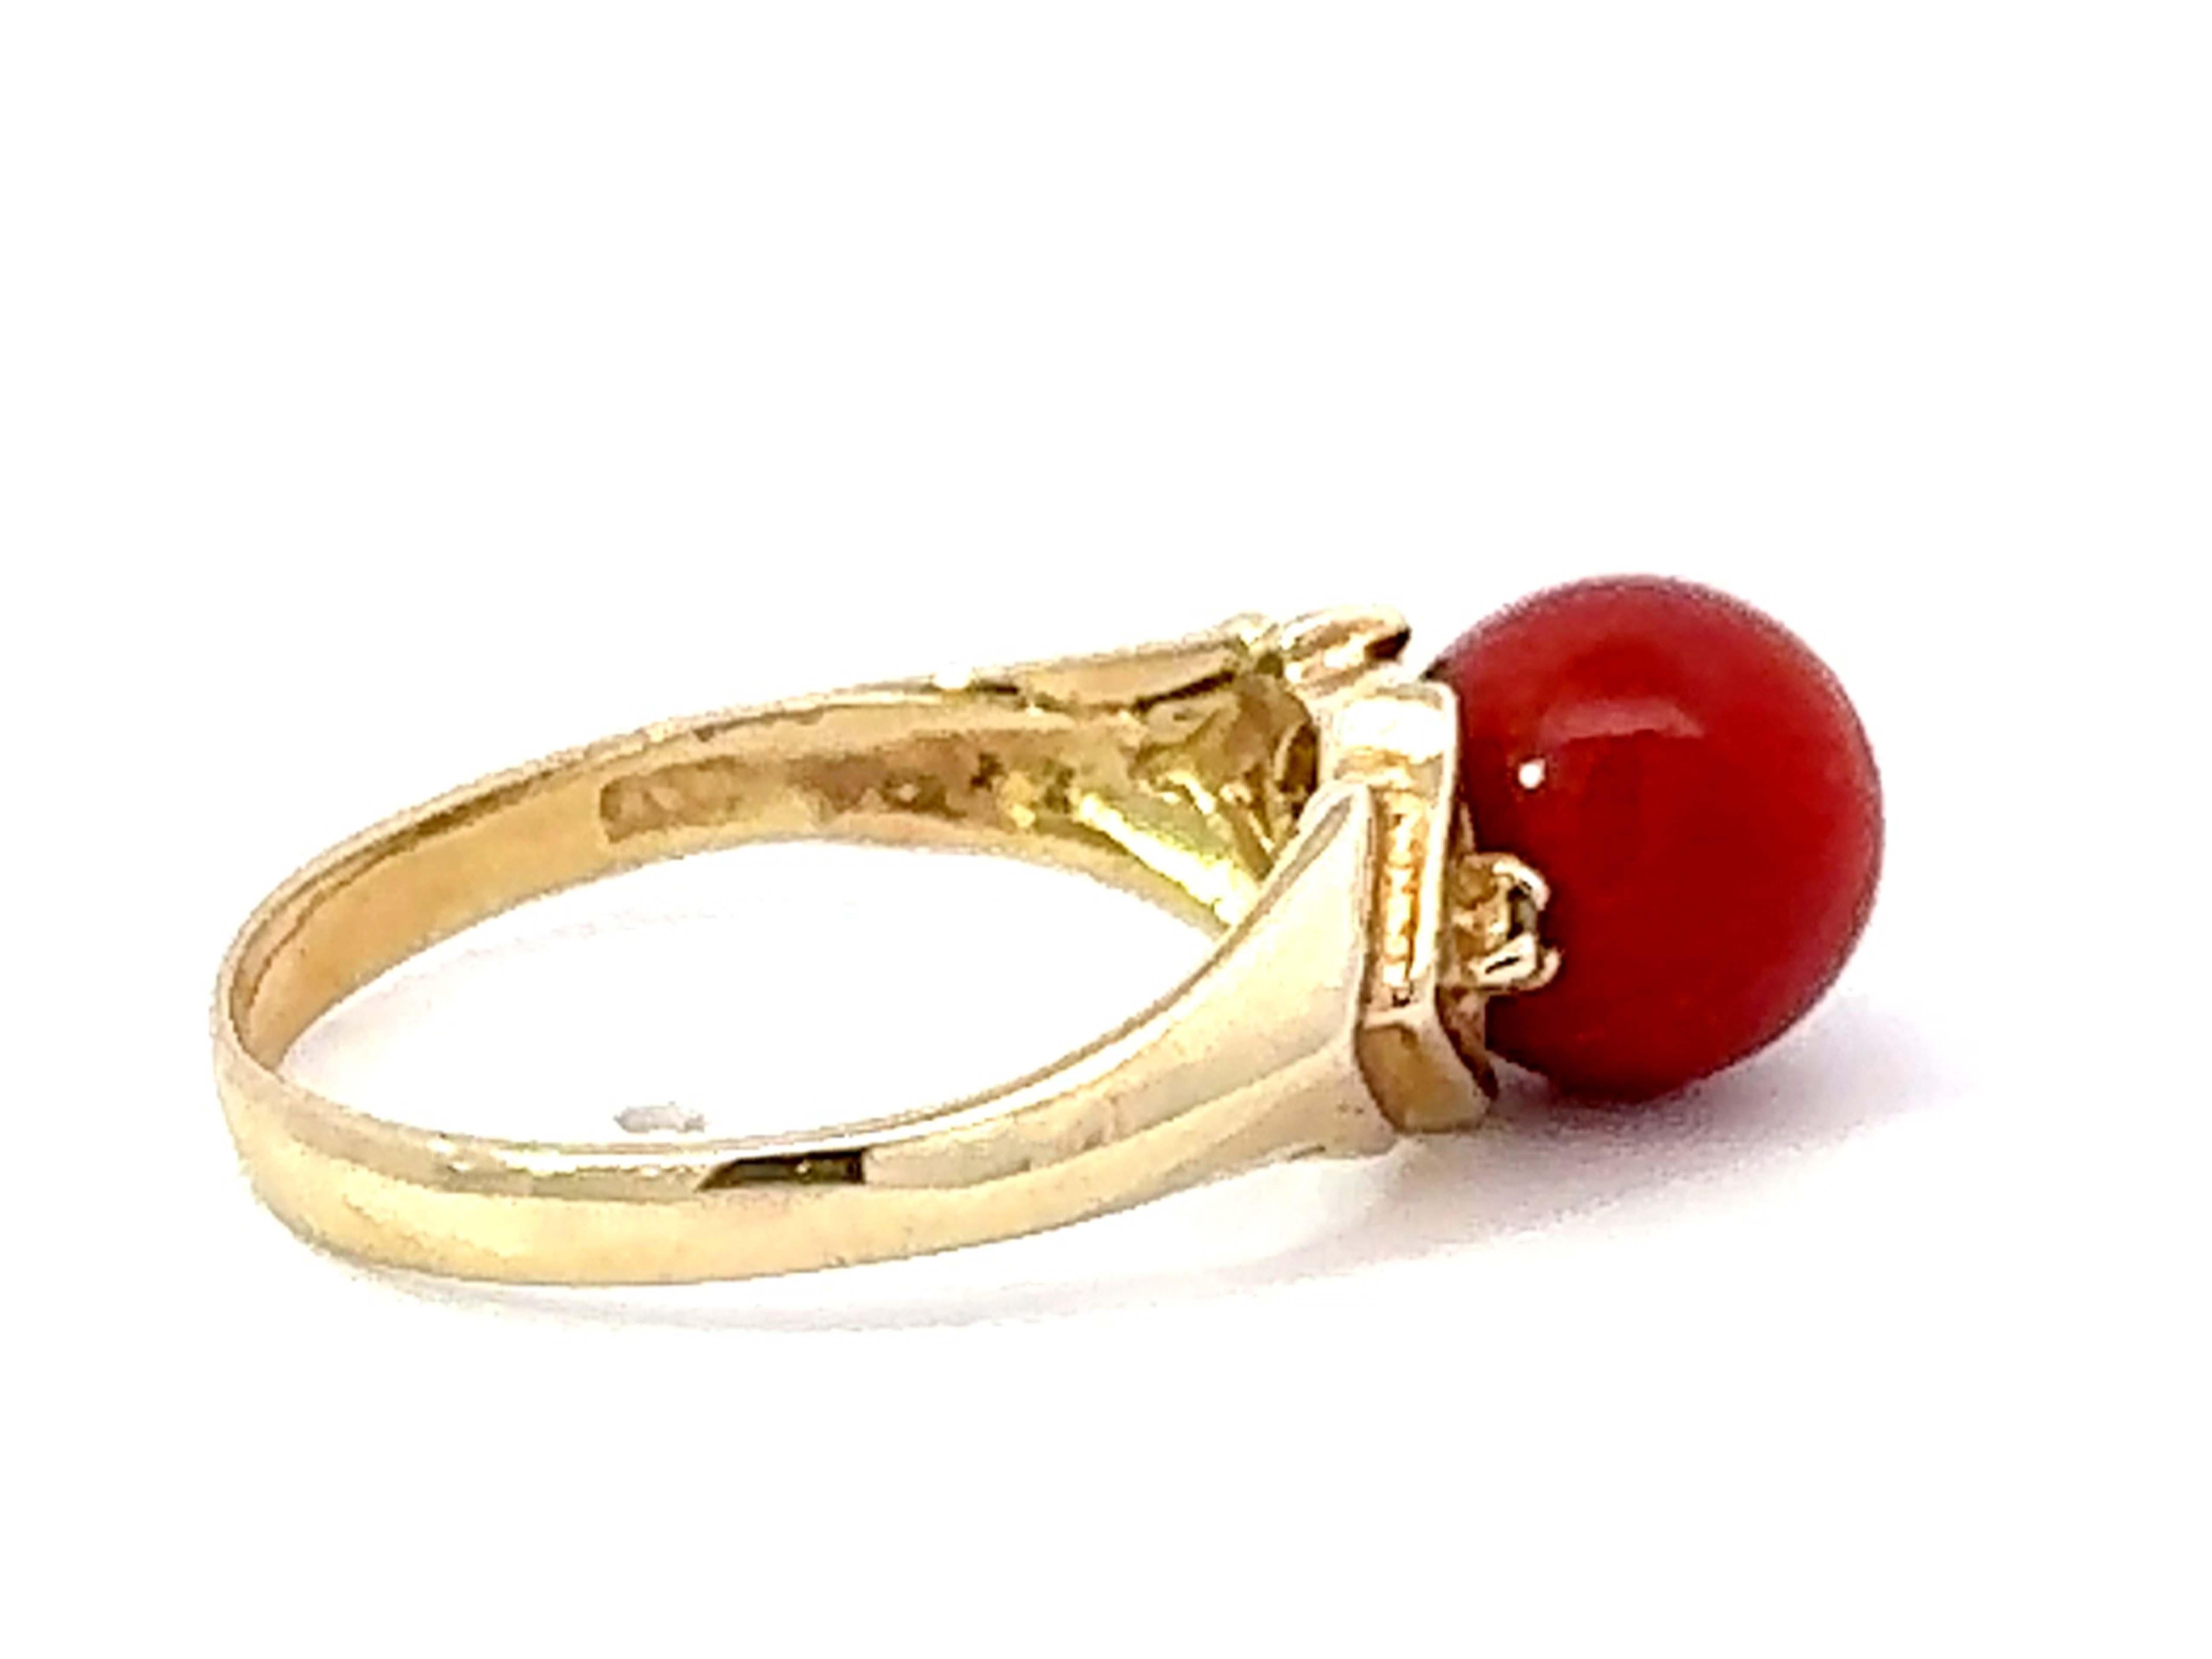 Red Aka Coral Sphere and Diamond Ring 14k Yellow Gold In Excellent Condition For Sale In Honolulu, HI